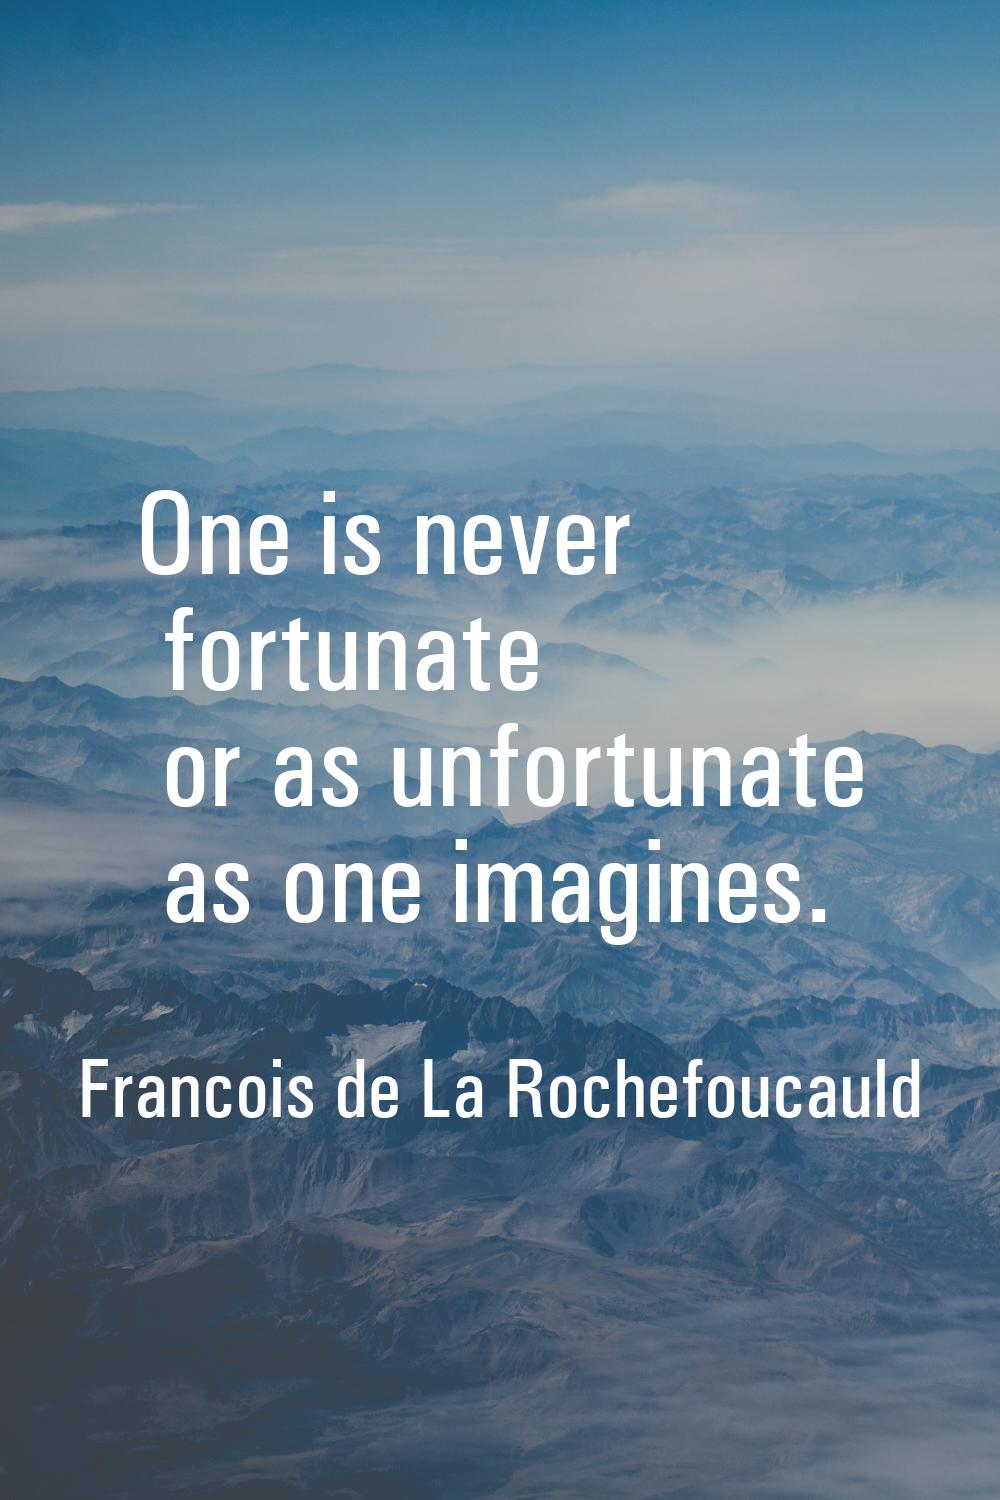 One is never fortunate or as unfortunate as one imagines.